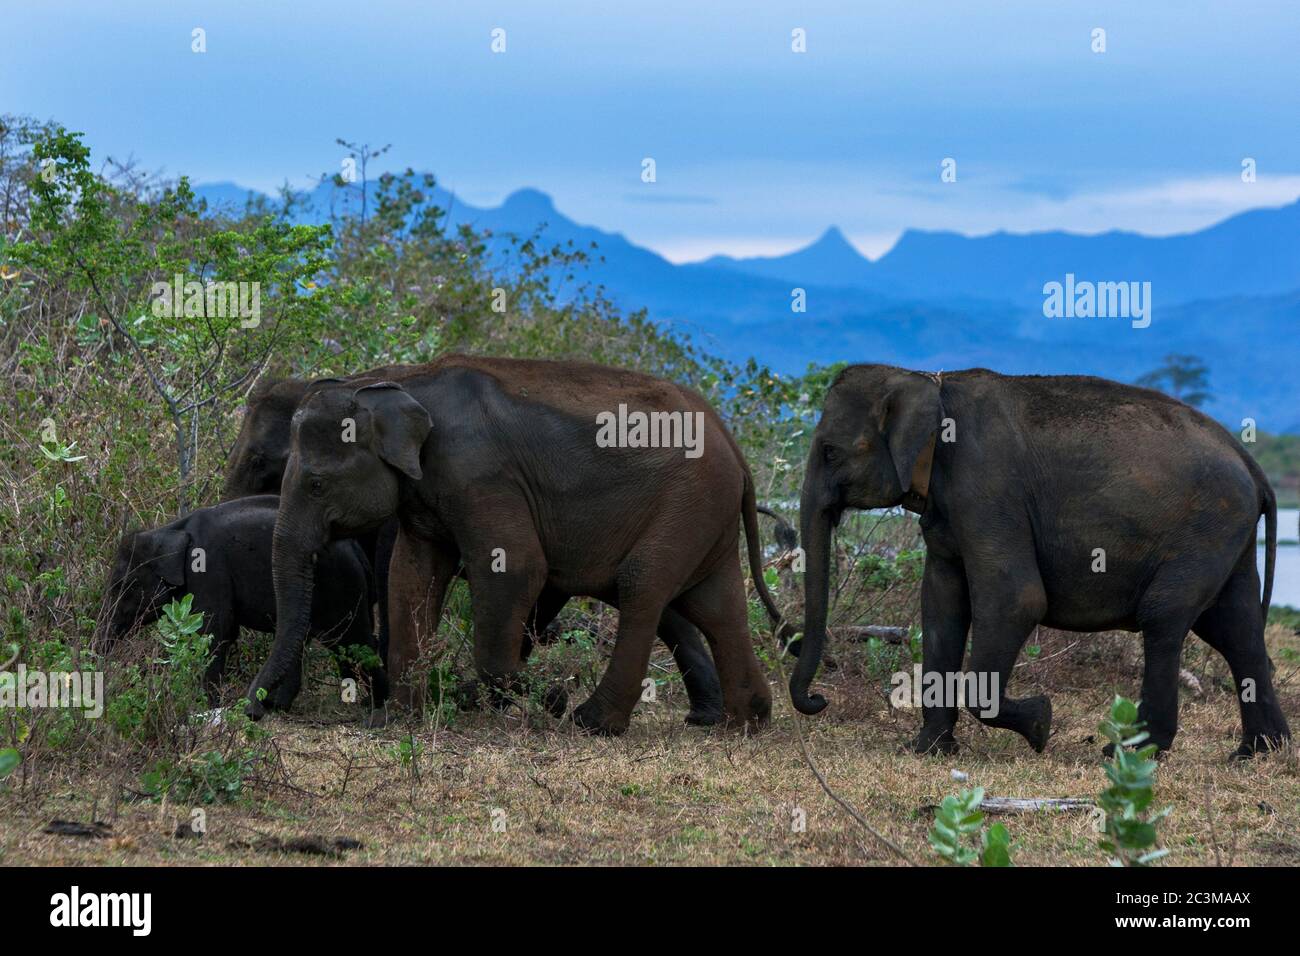 A herd of elephants head into savanna bush land at Uda Walawe National Park which is located 21 km from Embilipitiya in central Sri Lanka. Stock Photo